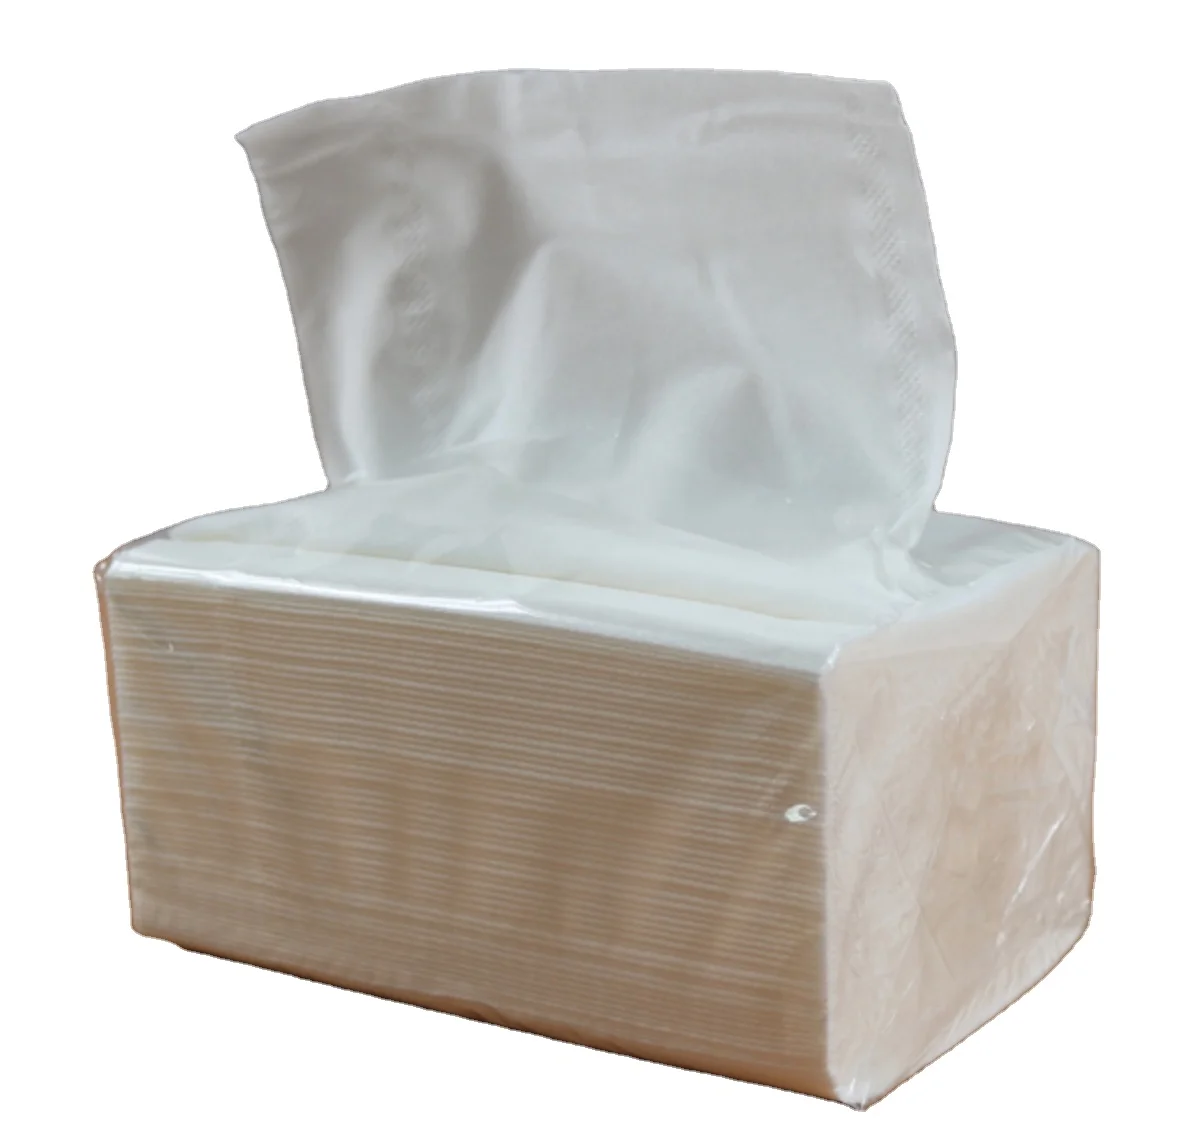 

Soft Pack 100 Sheets 3 ply Tissue Paper Soft Facial Tissue, White